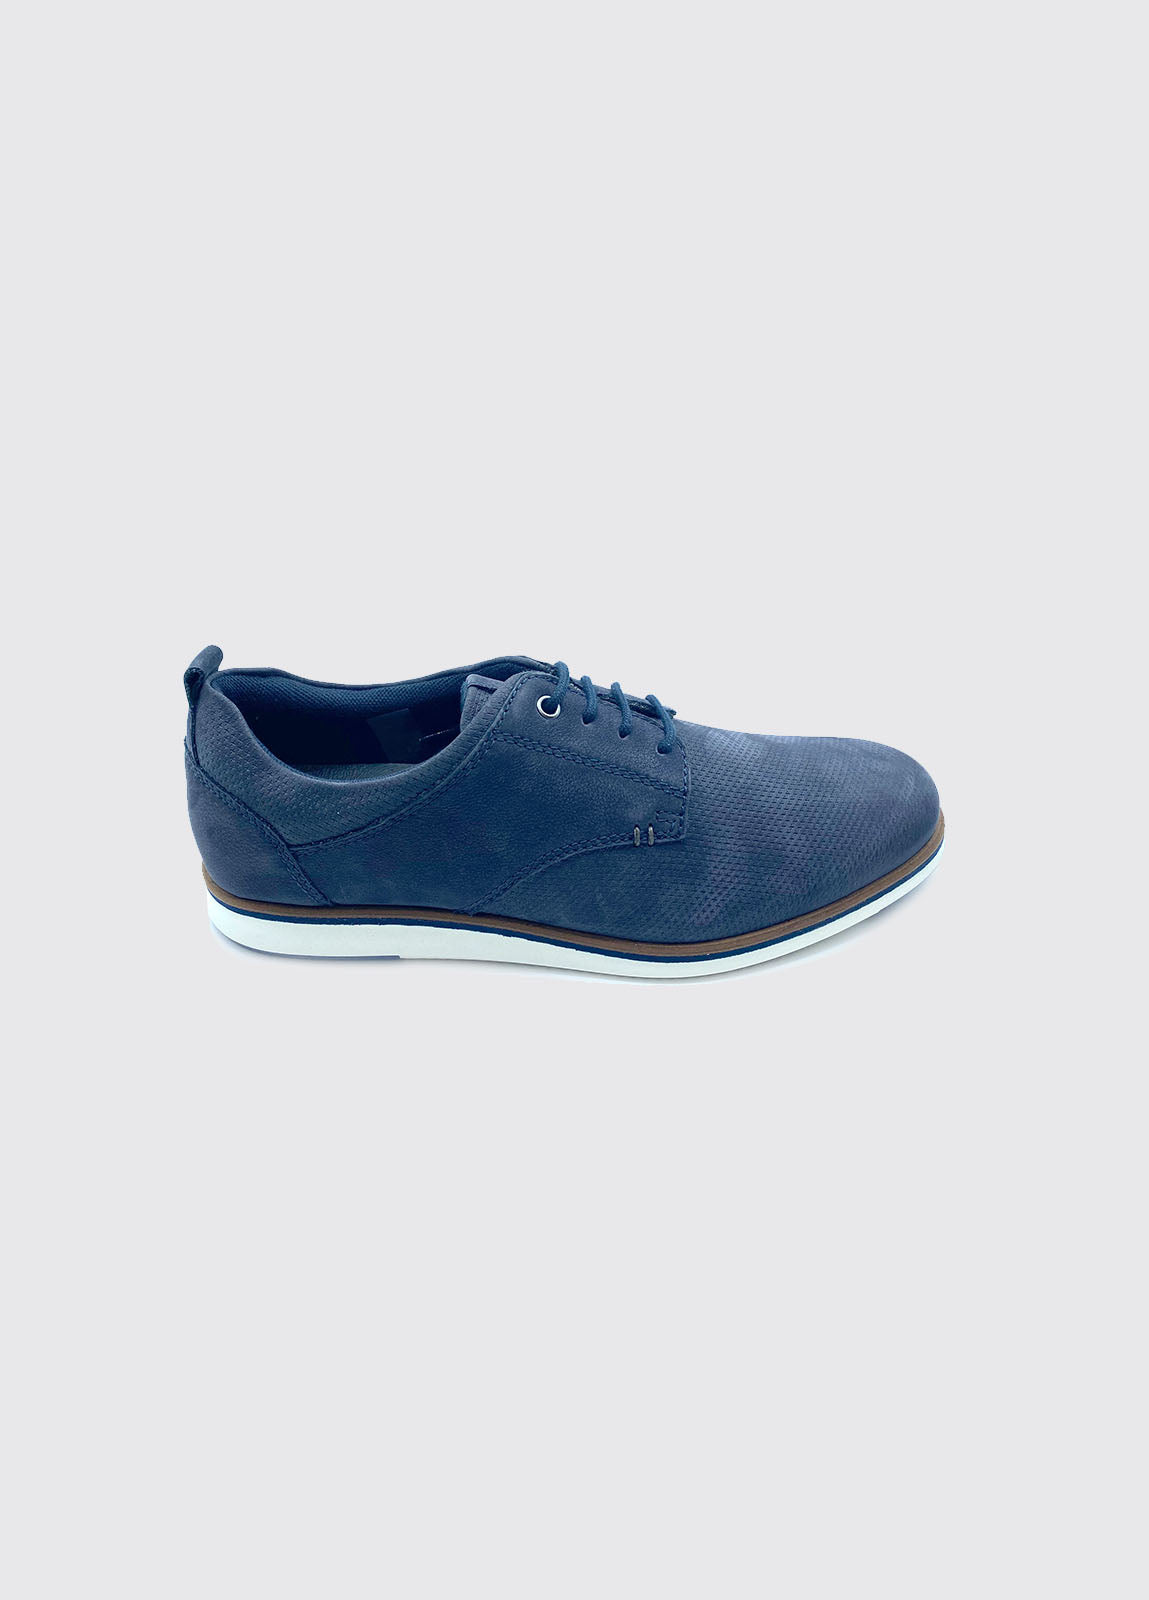 Stafford Navy Mens Shoe-Side view